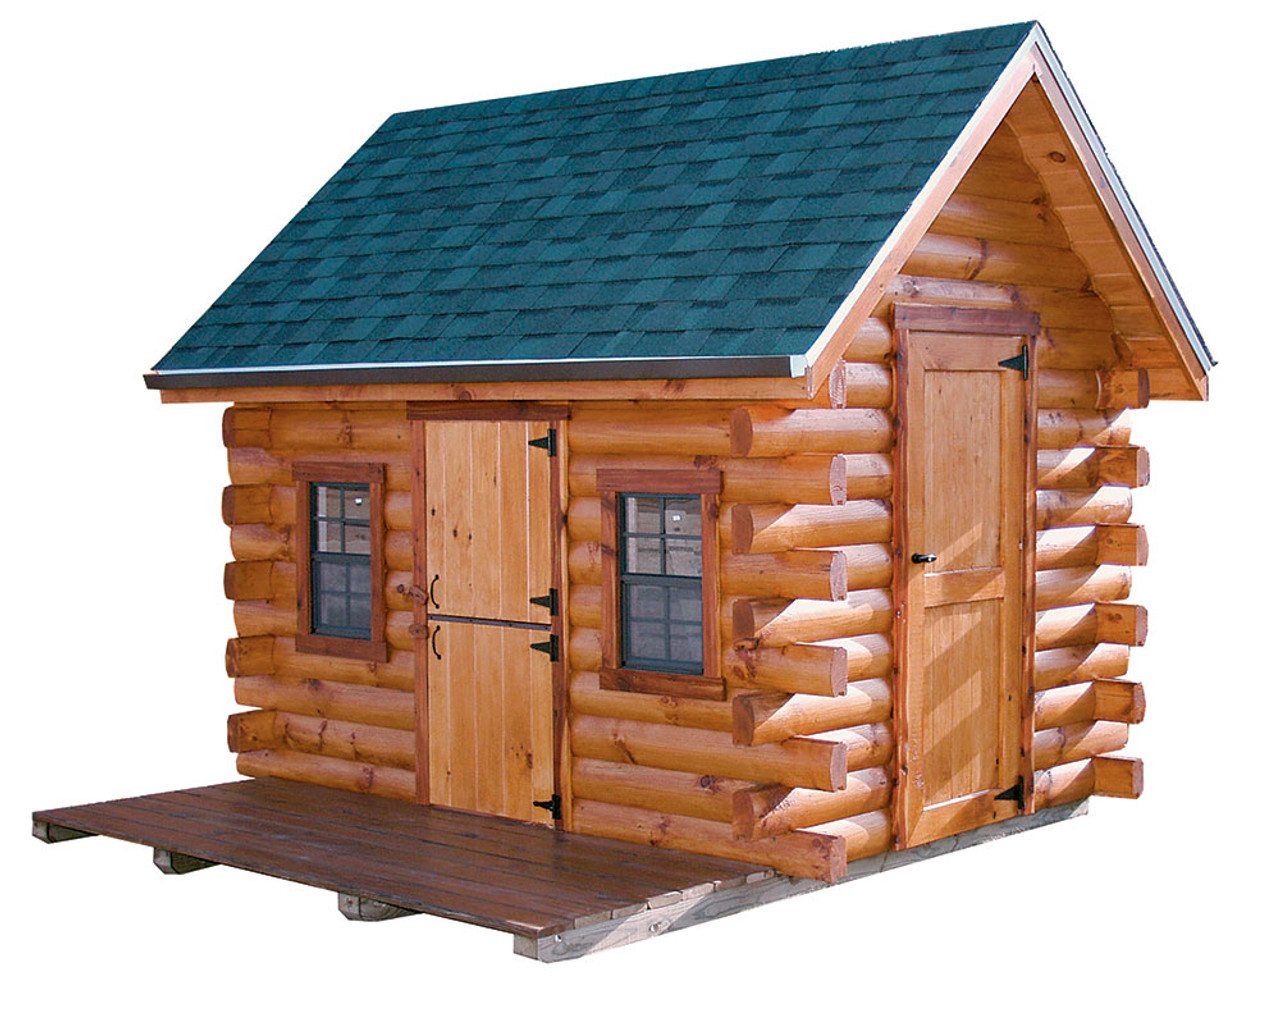 DIY Guide: How to Build a Log Cabin